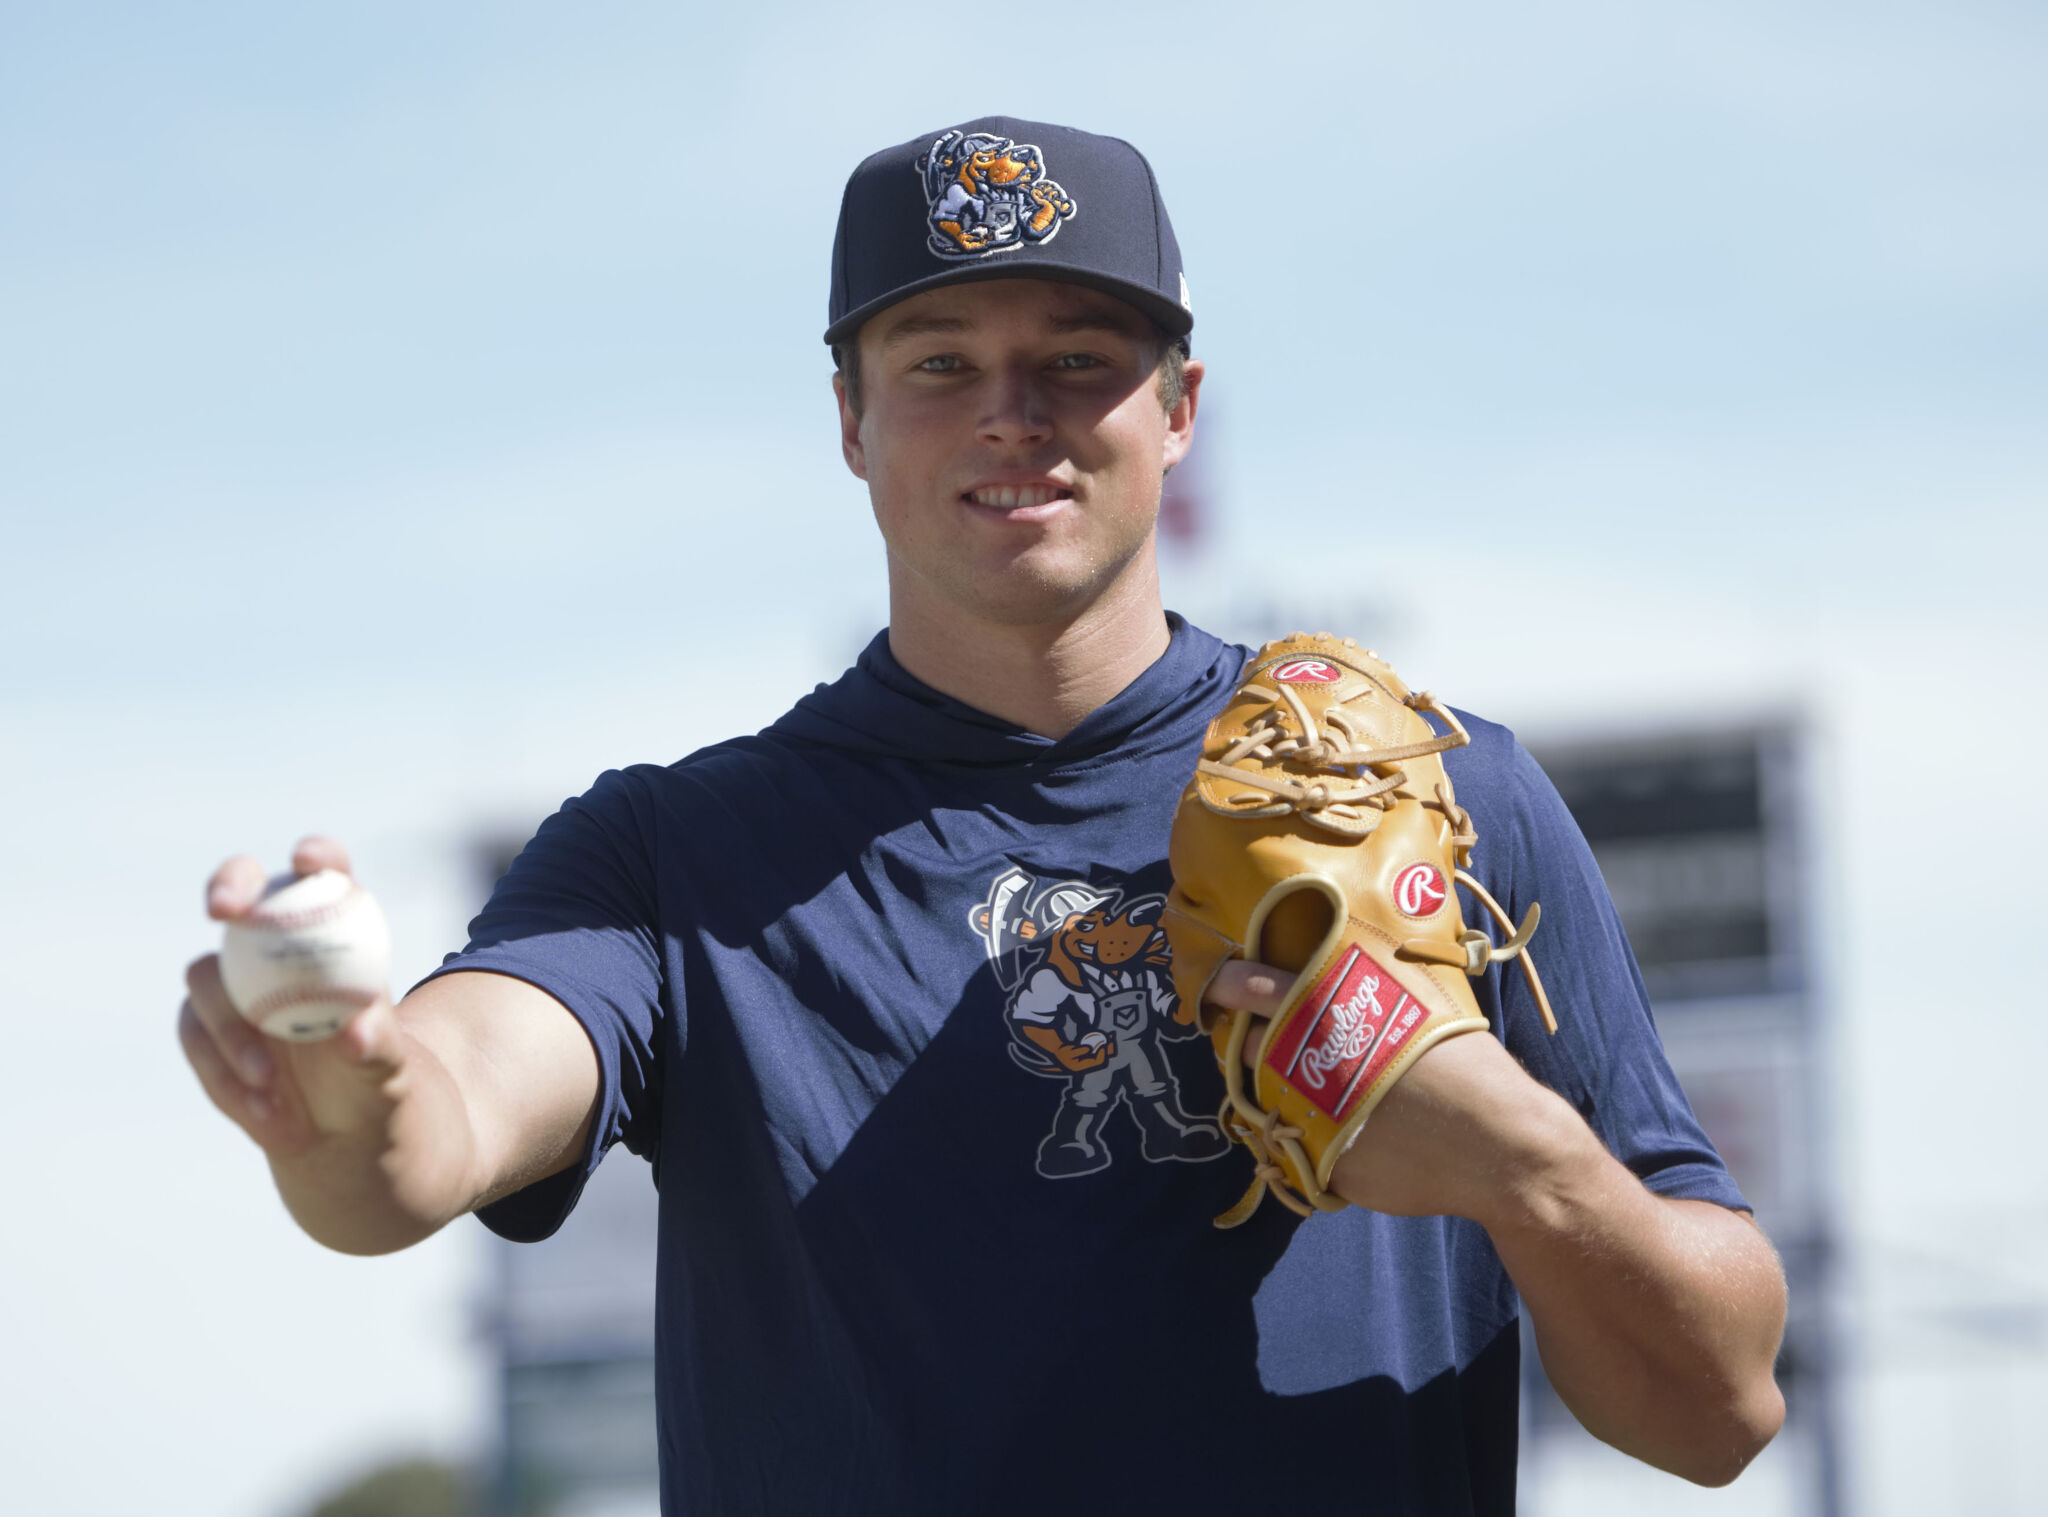  ROCKHOUNDS PREVIEW: Miller brings big-league arm to Hounds’ rotation 